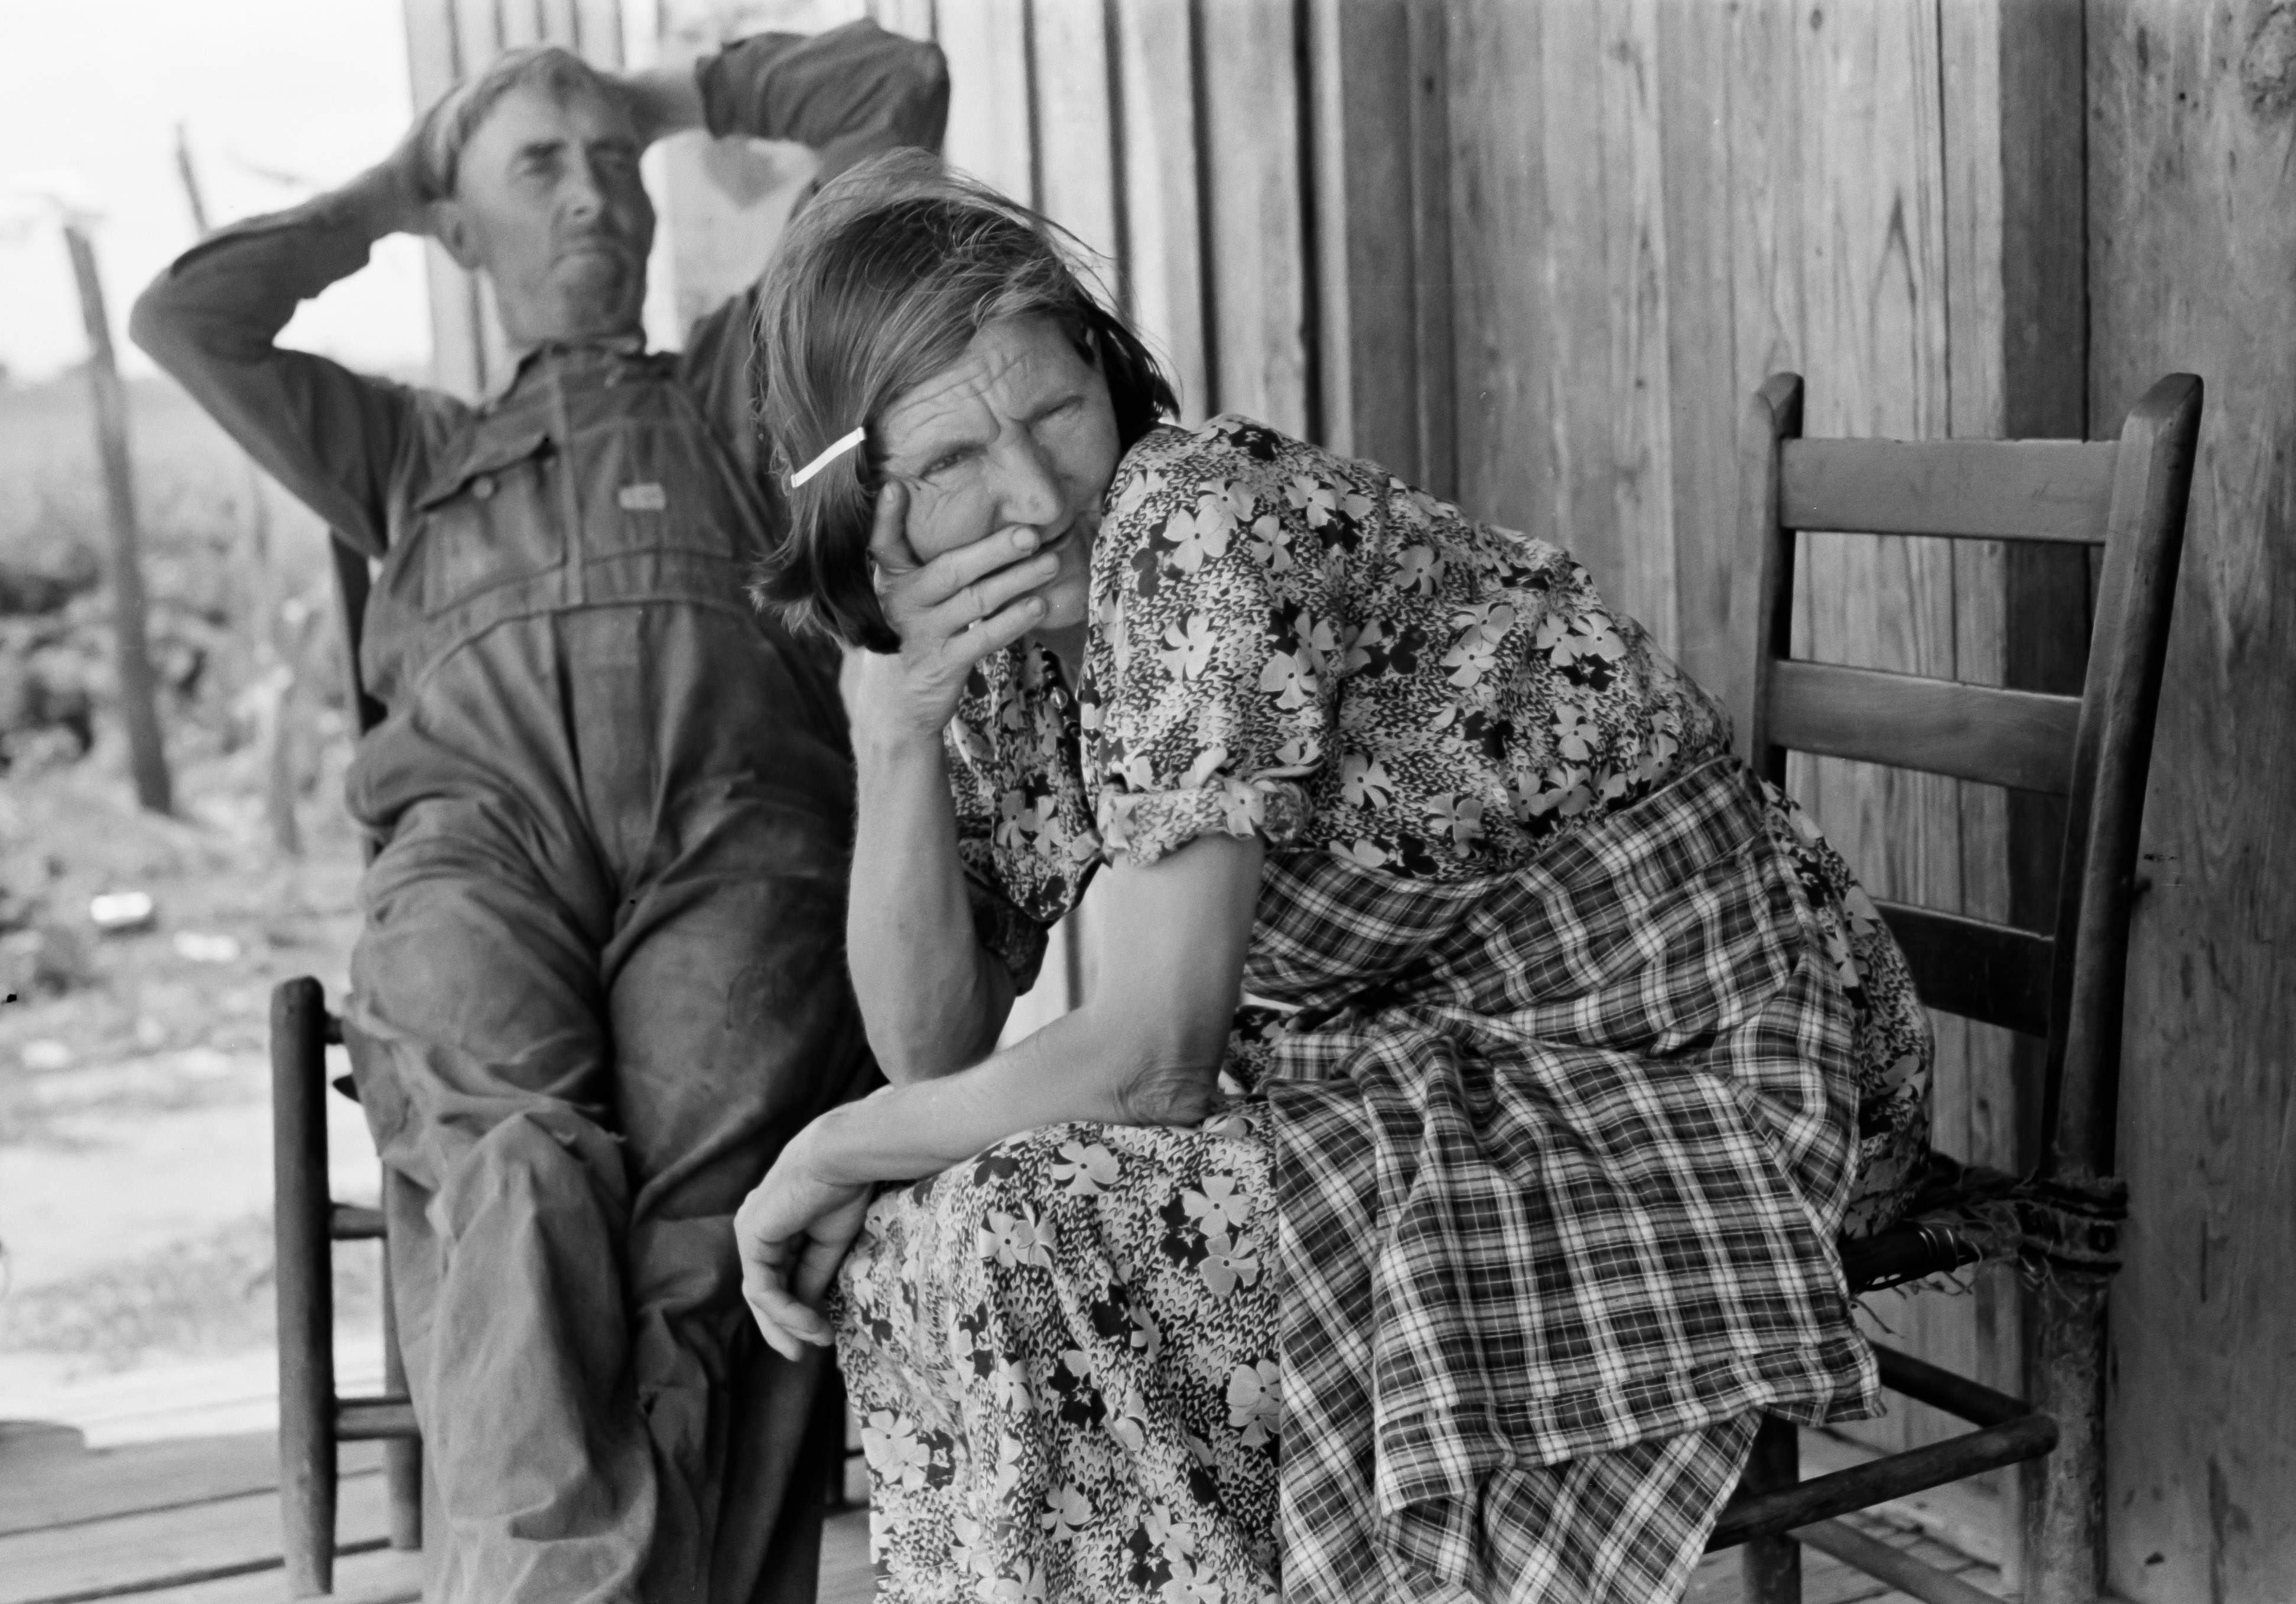 Russell Lee | Photos of The Great Depression